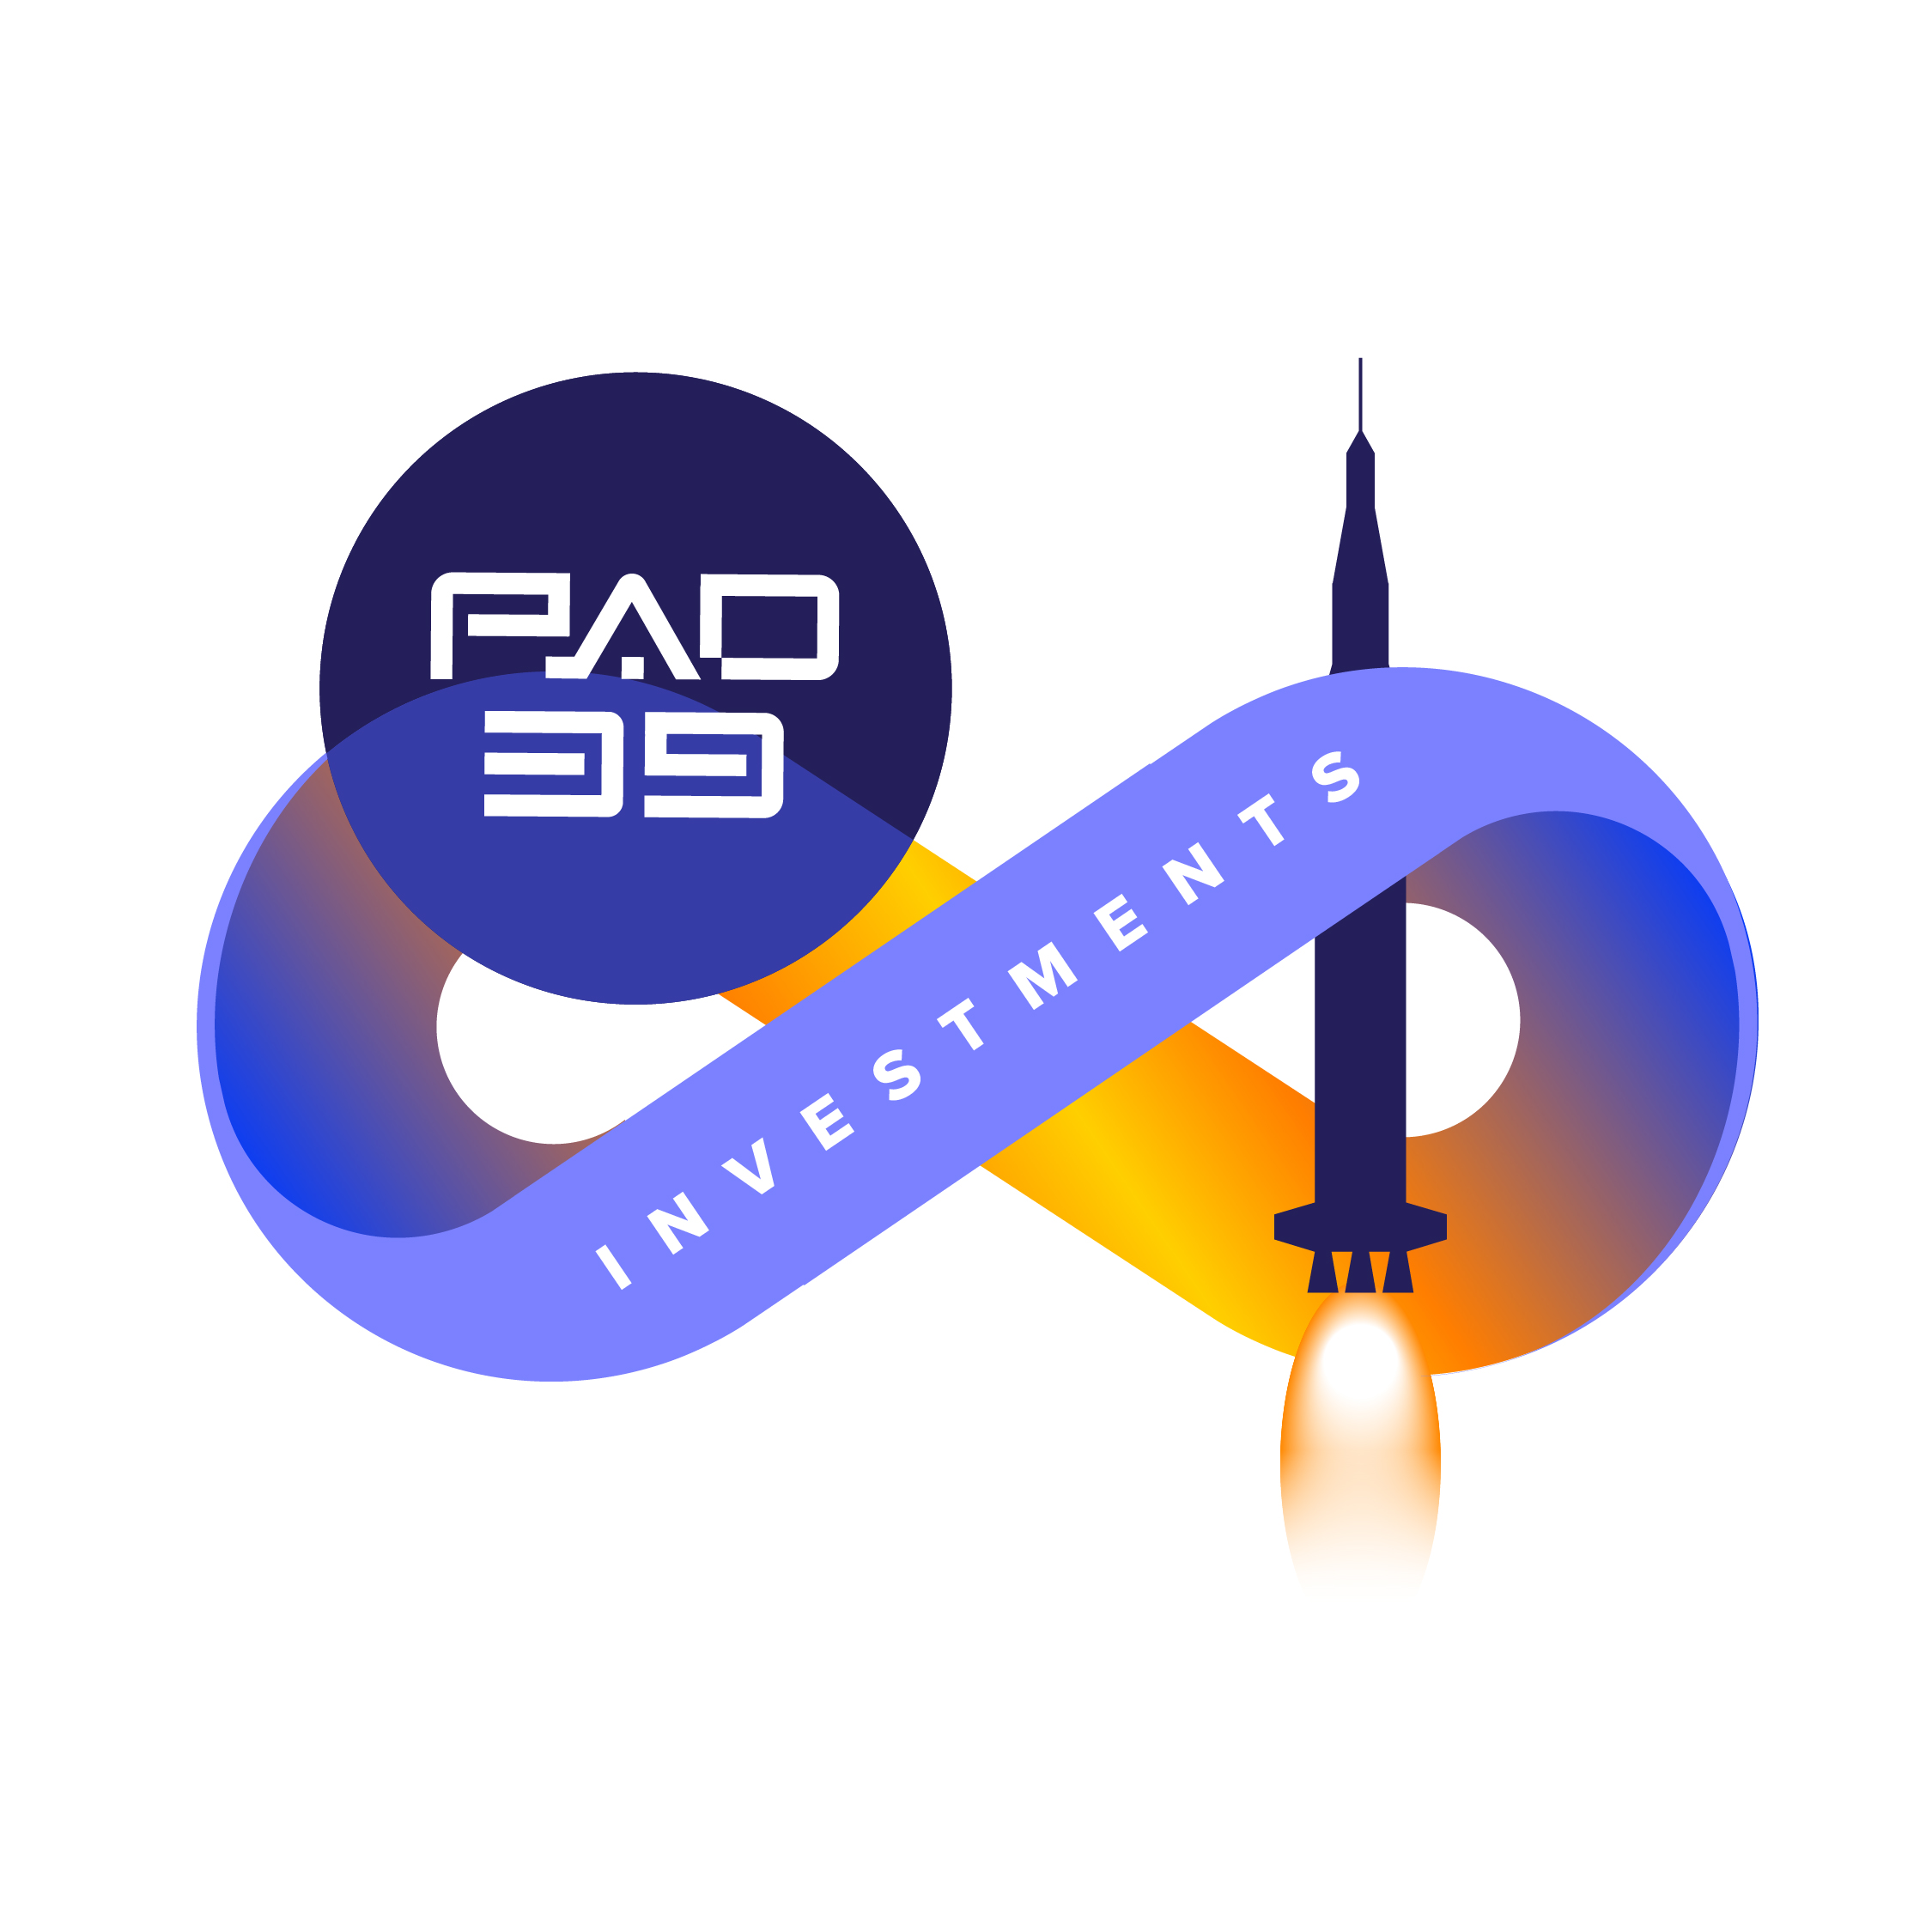 Pad39 logo design by logo designer thoughtfields for your inspiration and for the worlds largest logo competition